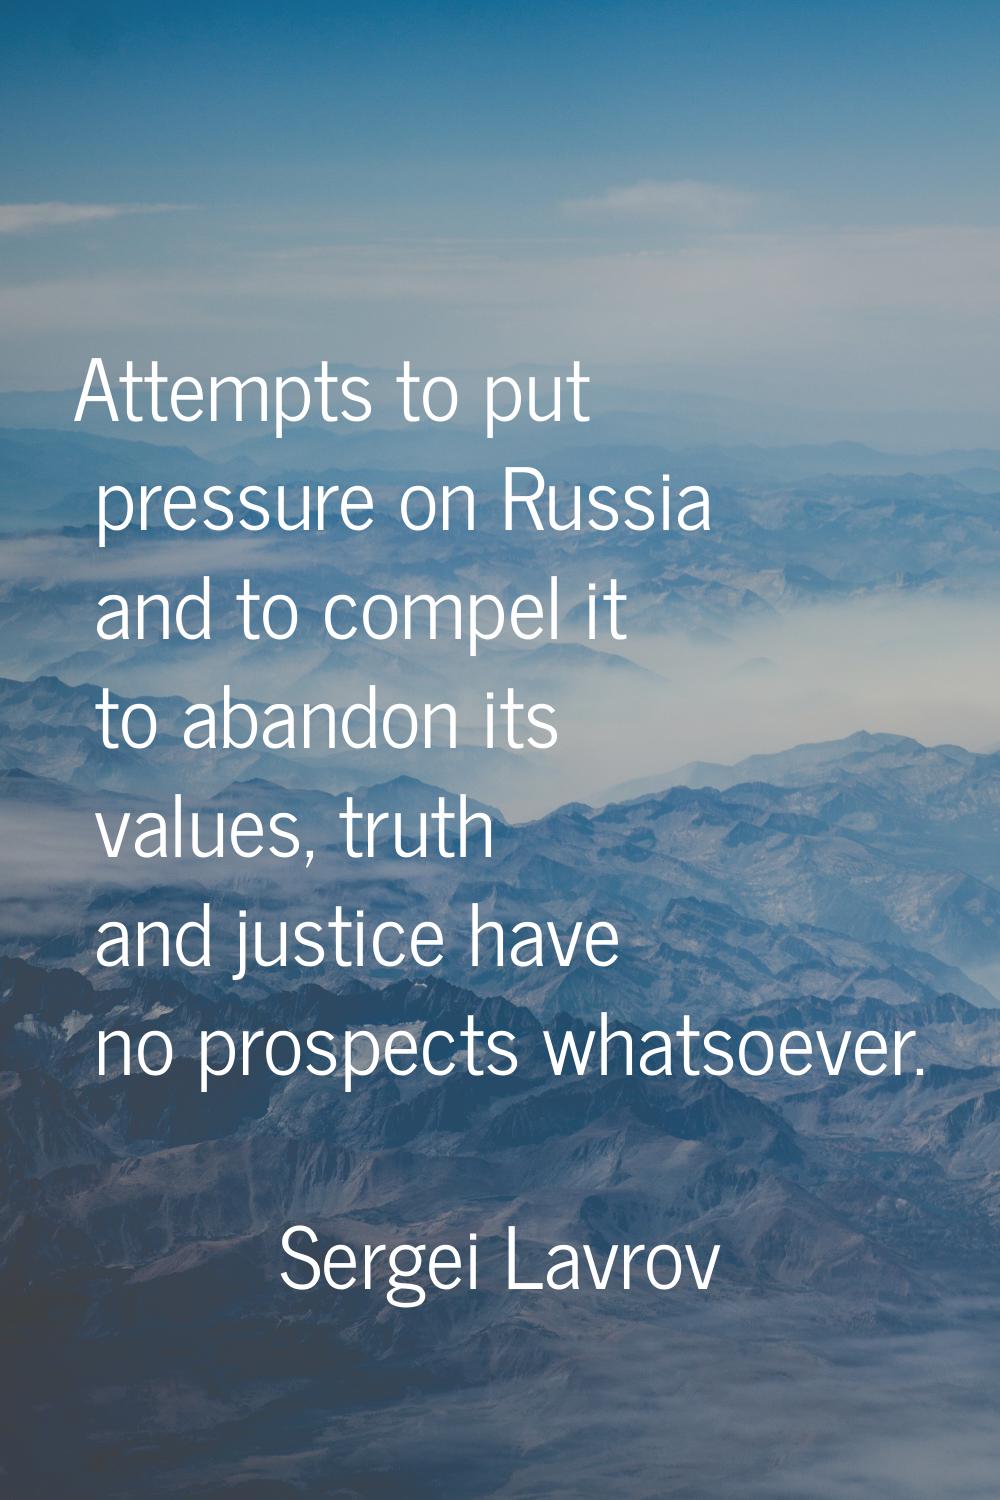 Attempts to put pressure on Russia and to compel it to abandon its values, truth and justice have n